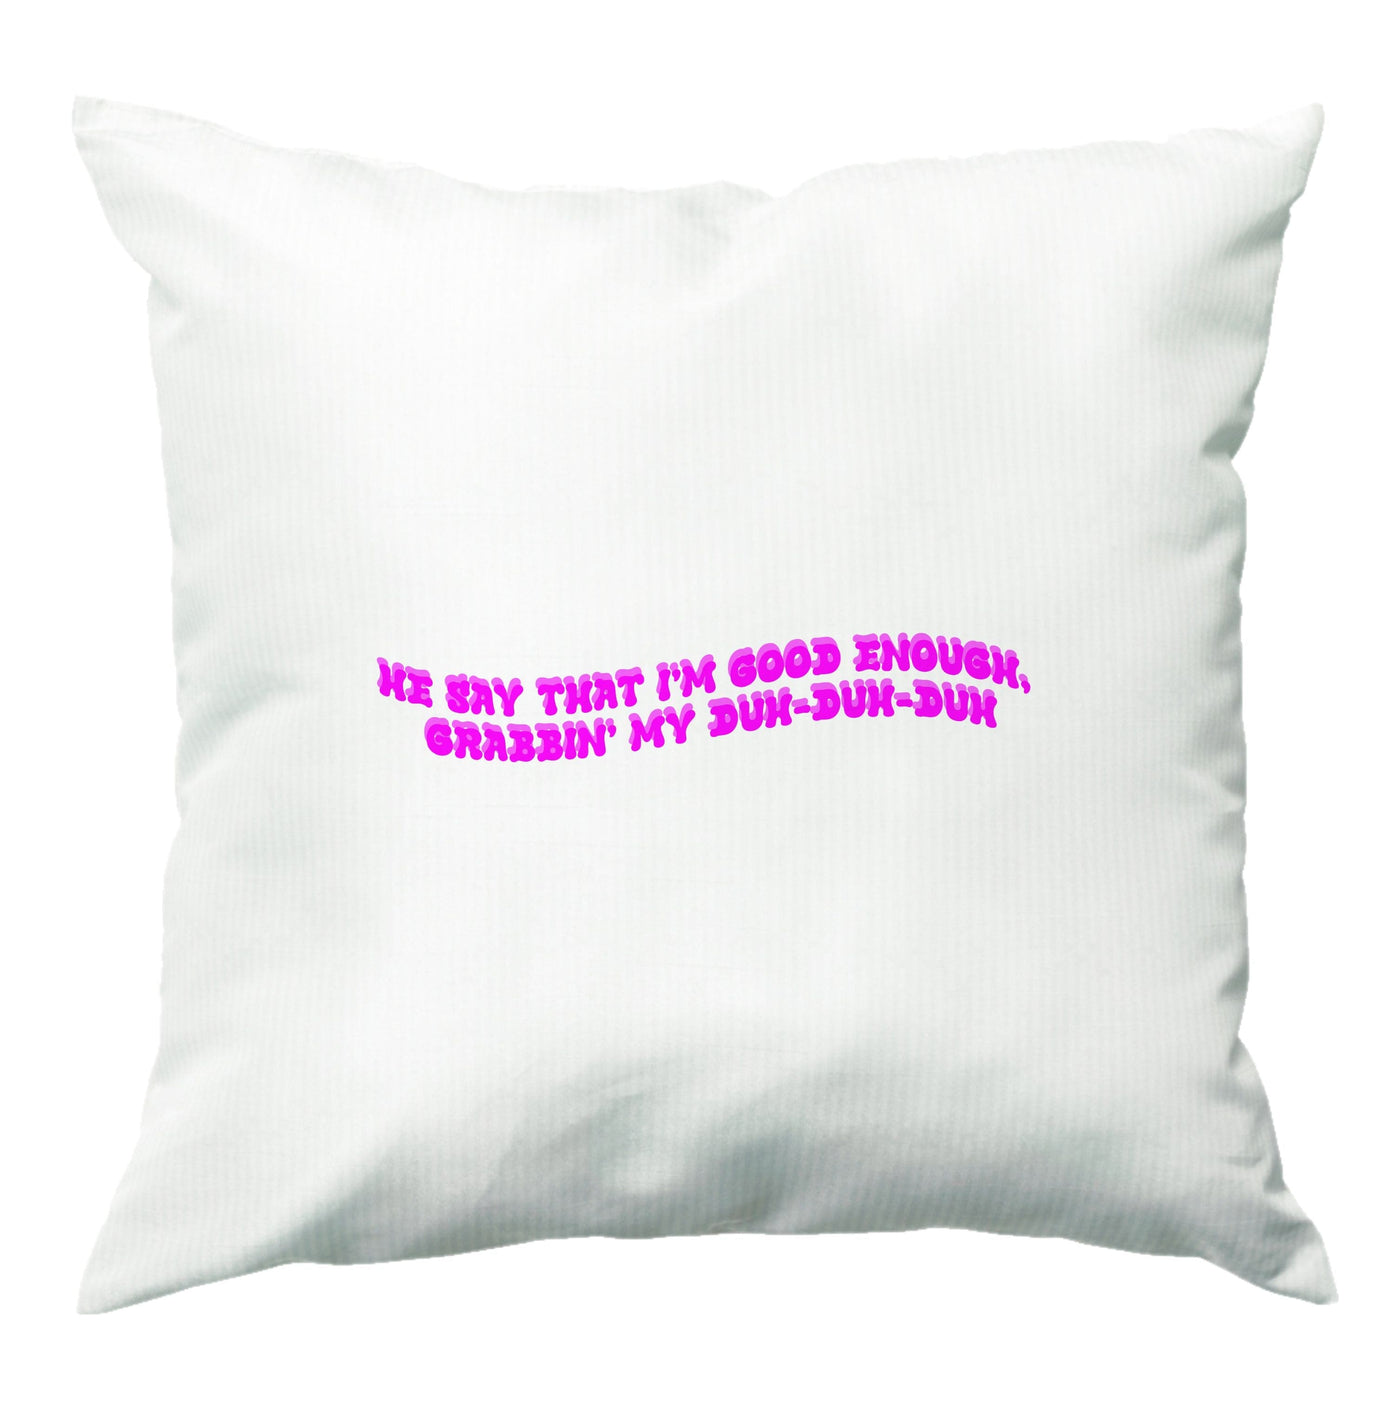 He Say That I'm Good Enough - Ice Spice Cushion